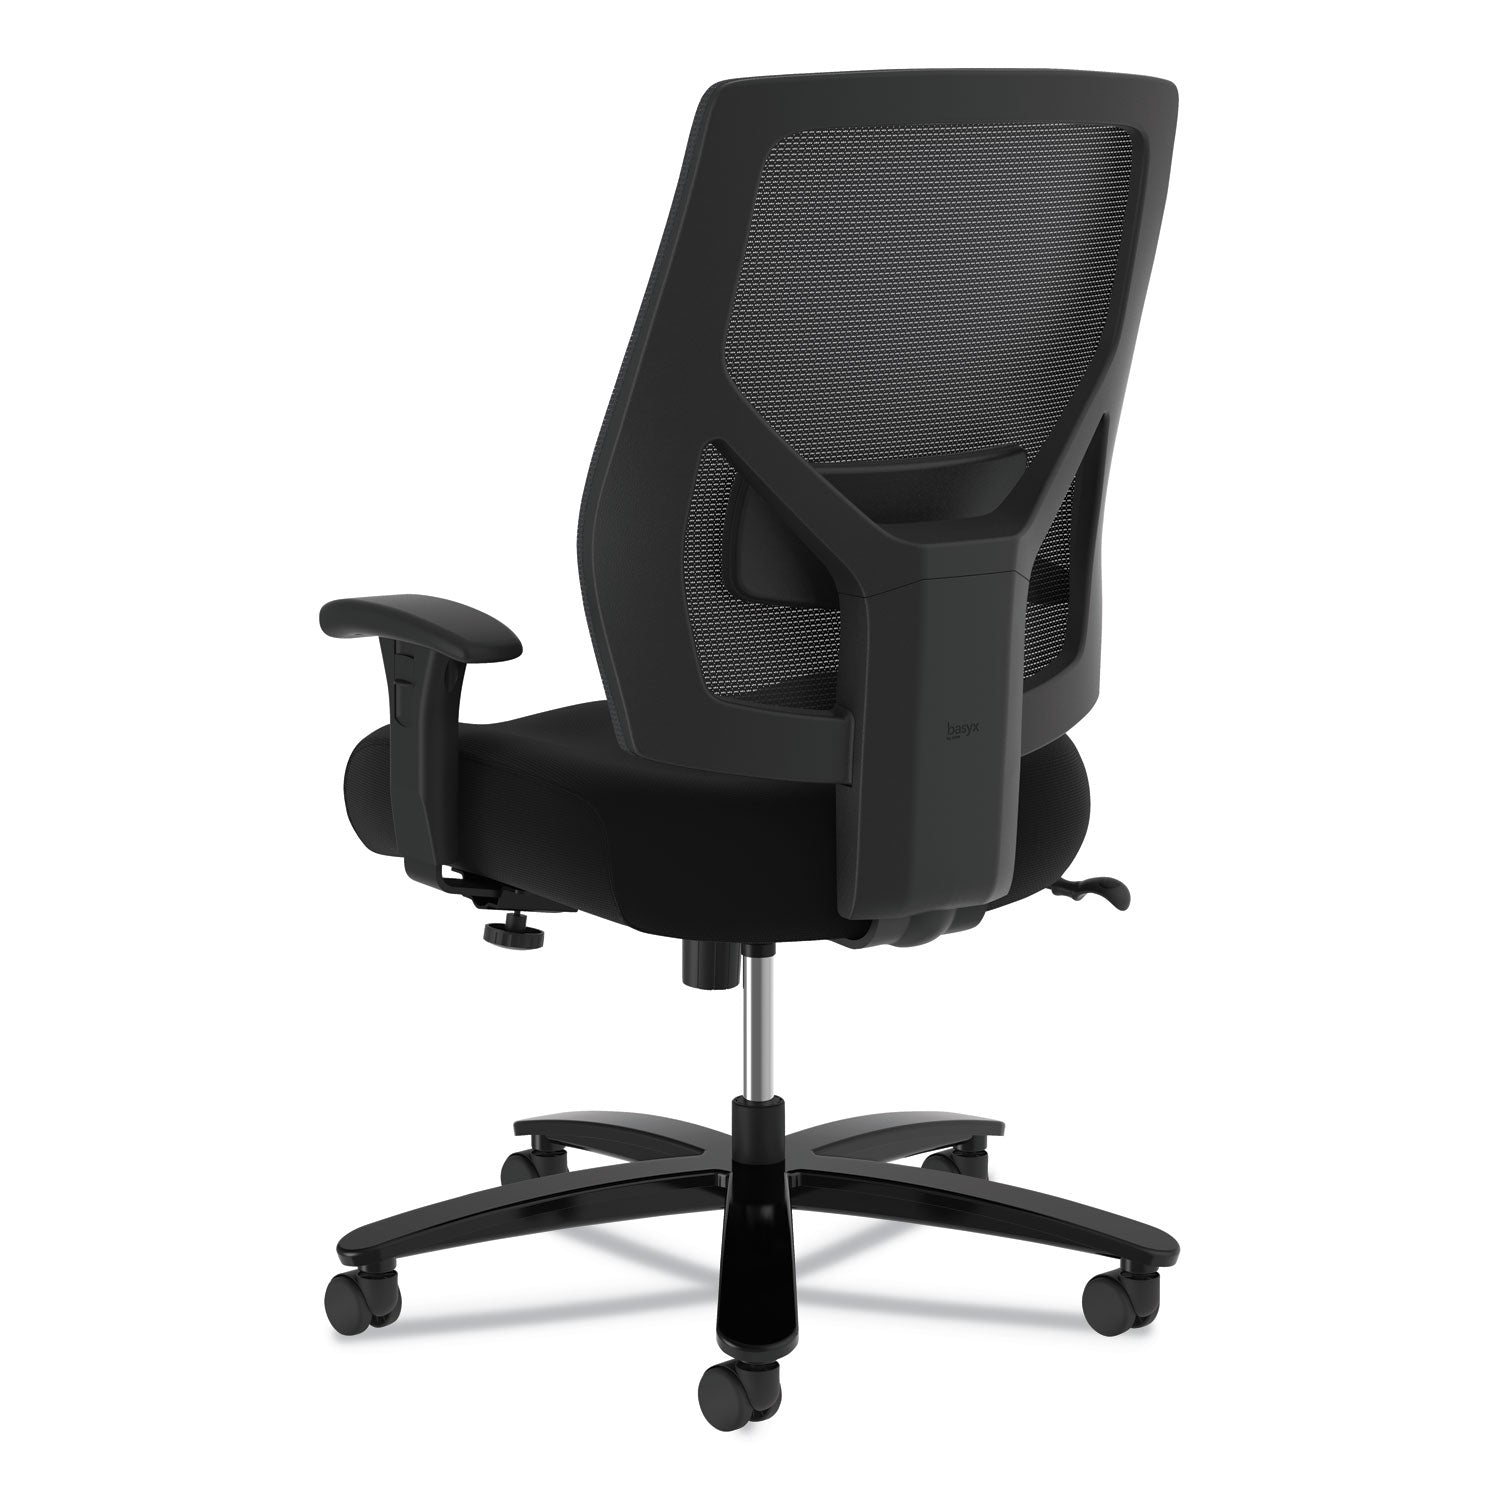 crio-big-and-tall-mid-back-task-chair-supports-up-to-450-lb-18-to-22-seat-height-black_bsxvl585es10t - 4